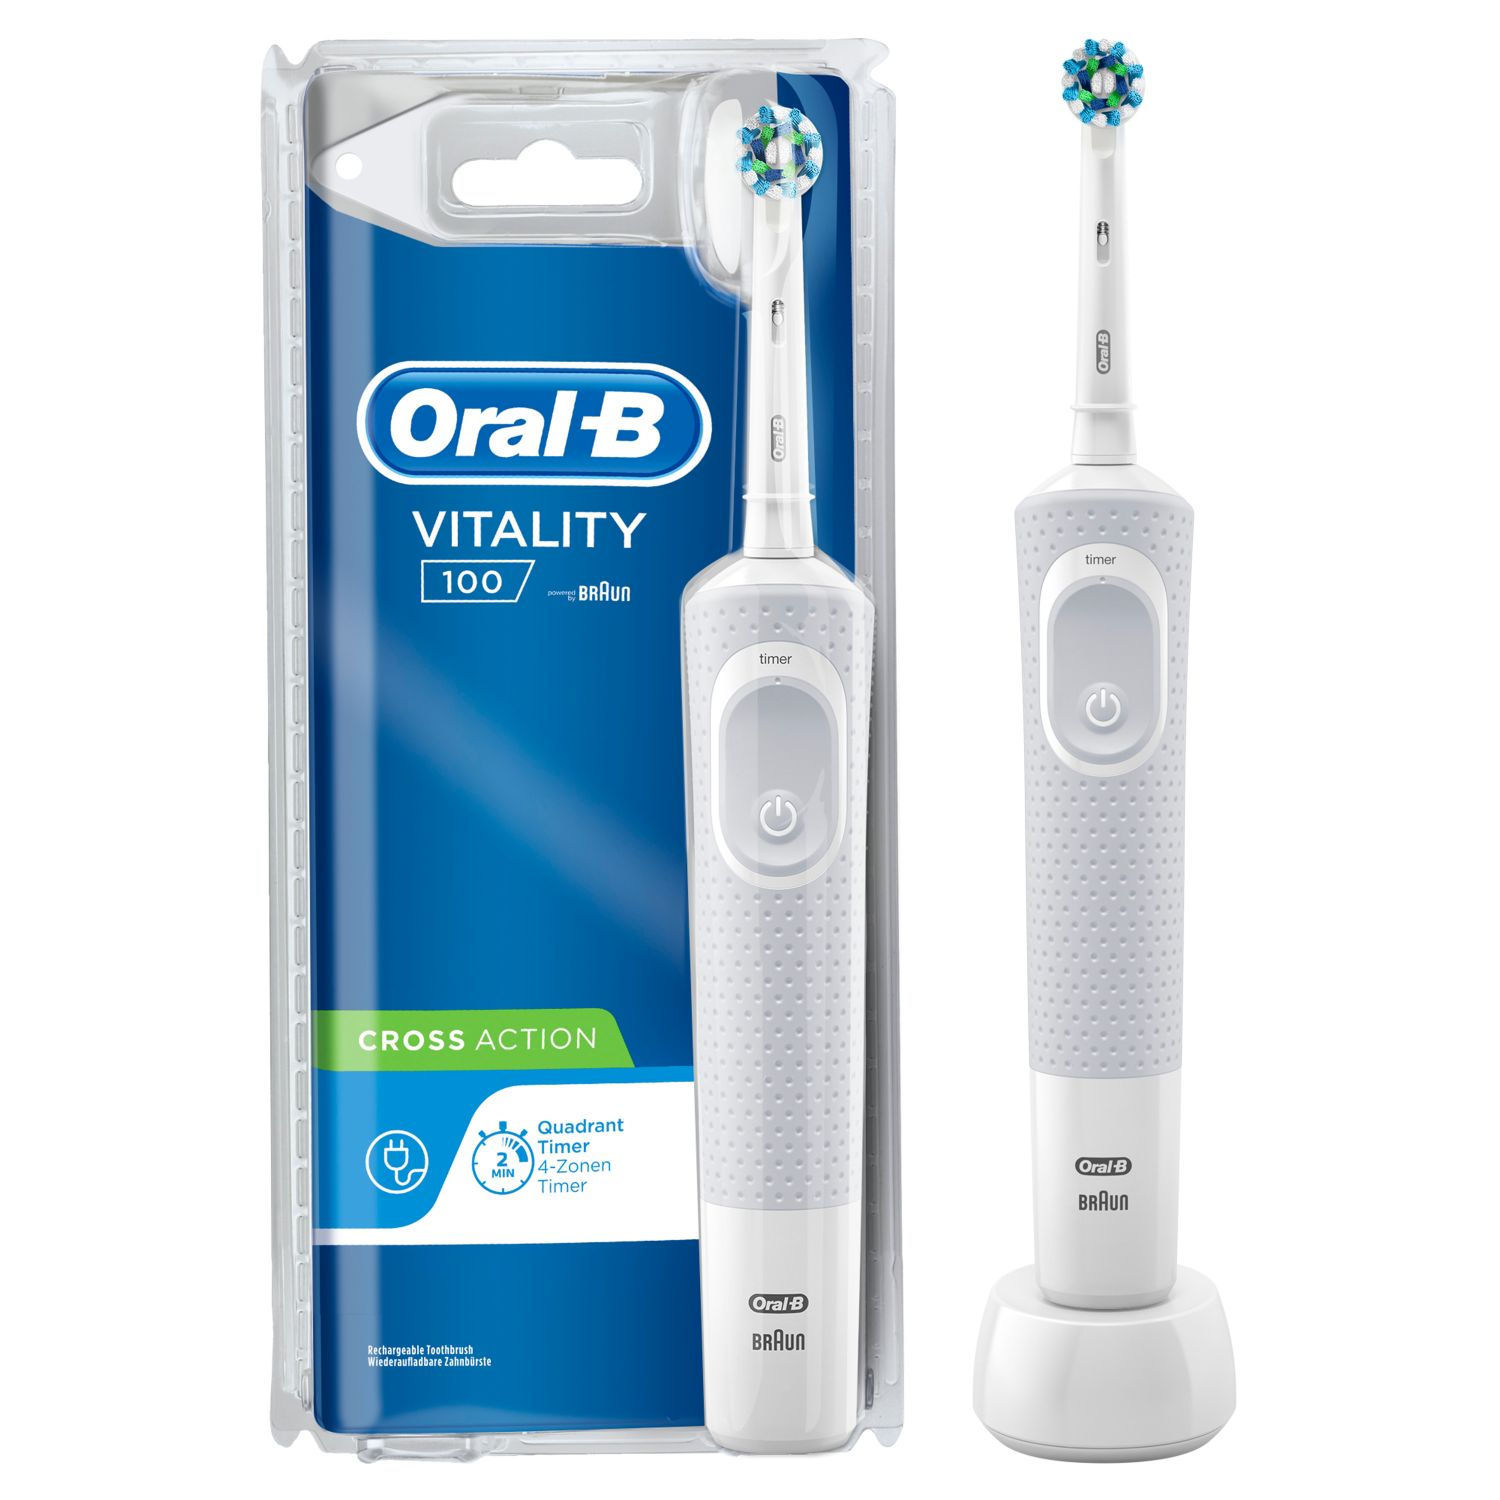 Oral-B Vitality 100 Cross Action Electric Rechargeable Toothbrush (White)